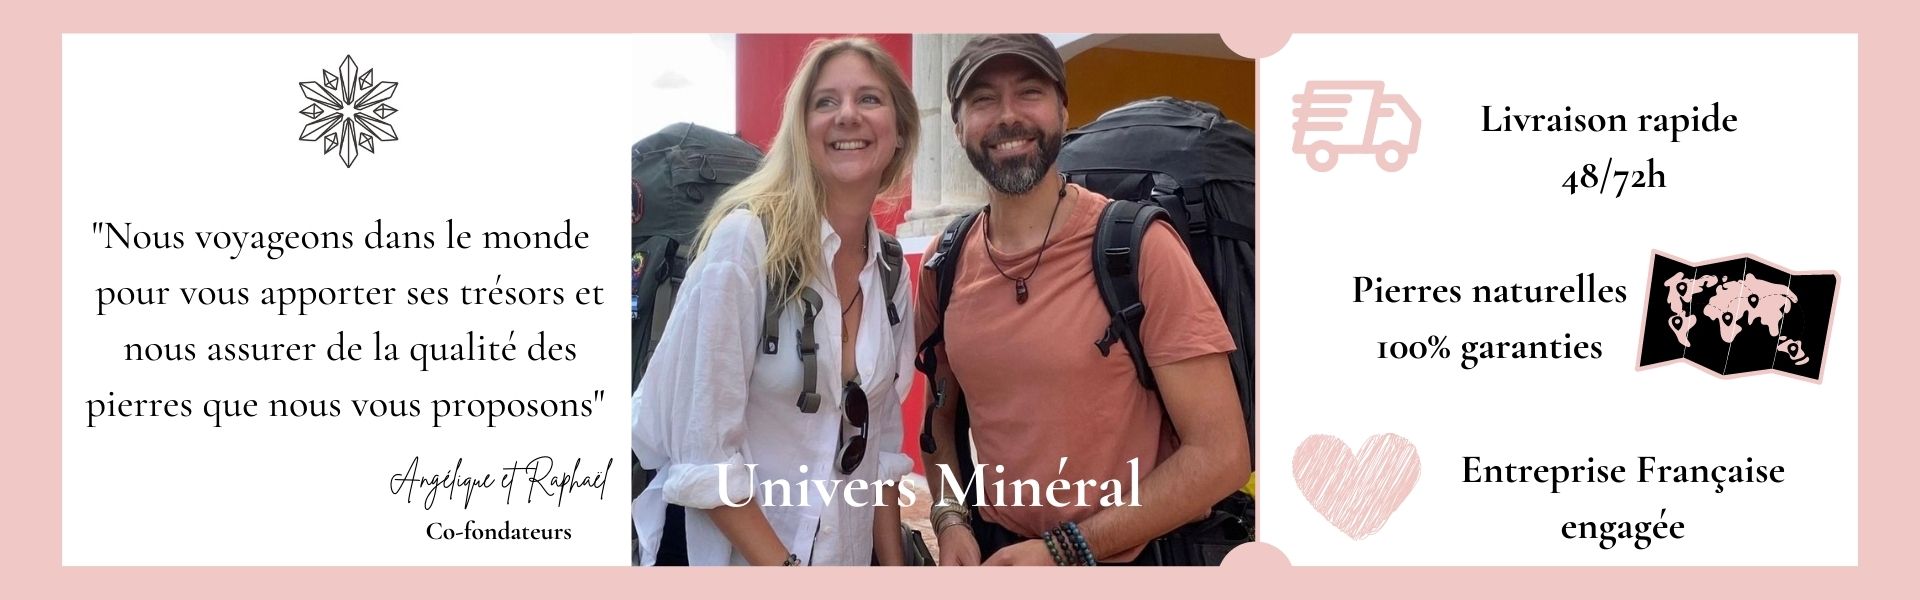 univers mineral lithotherapie